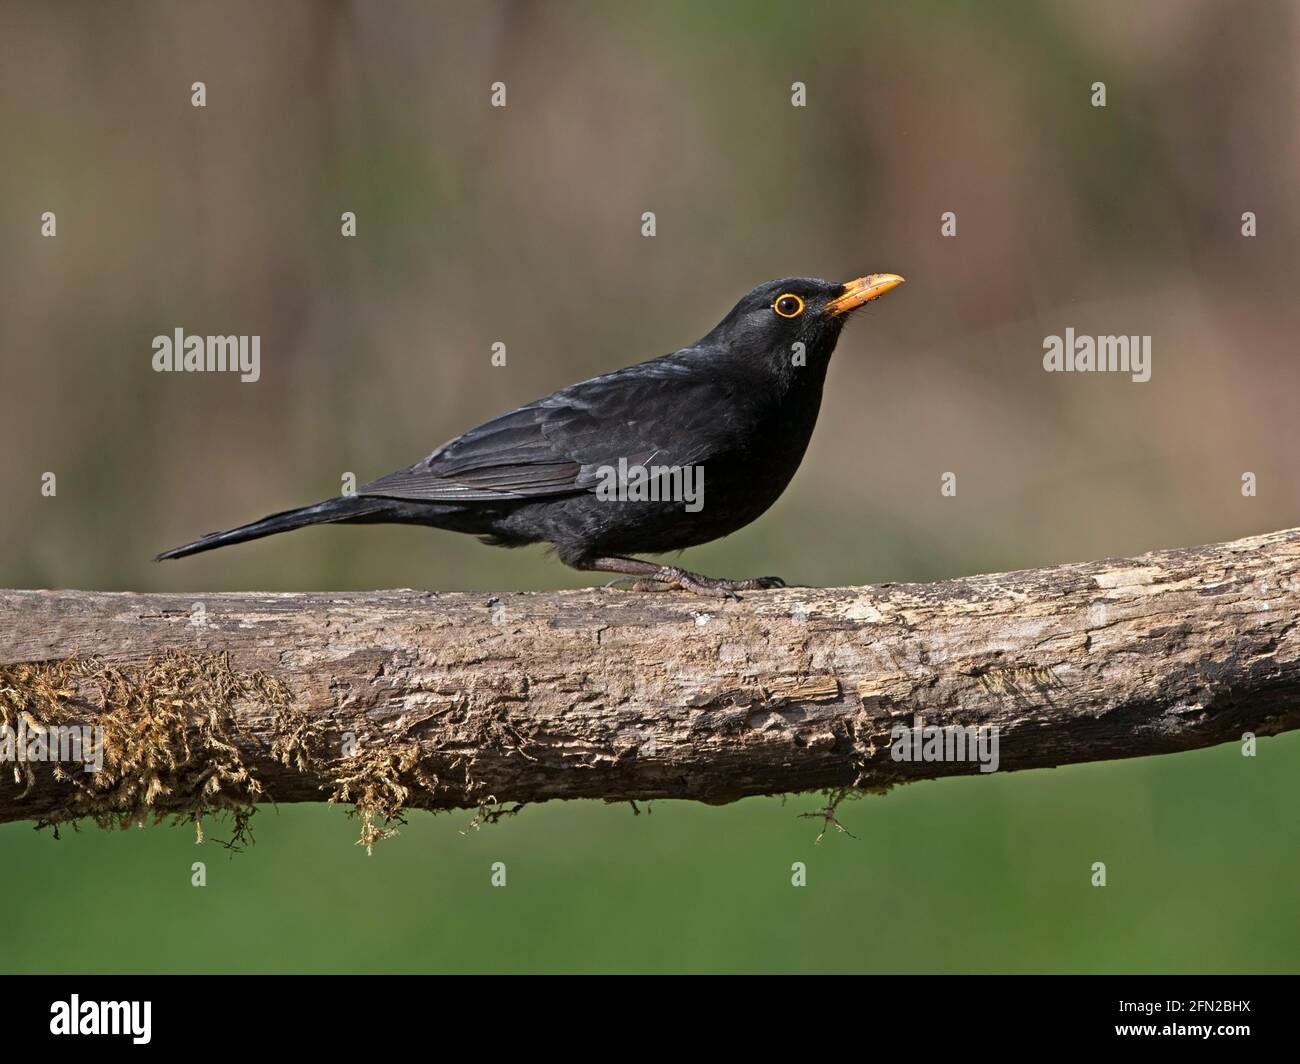 Male common blackbird perched on branch Stock Photo